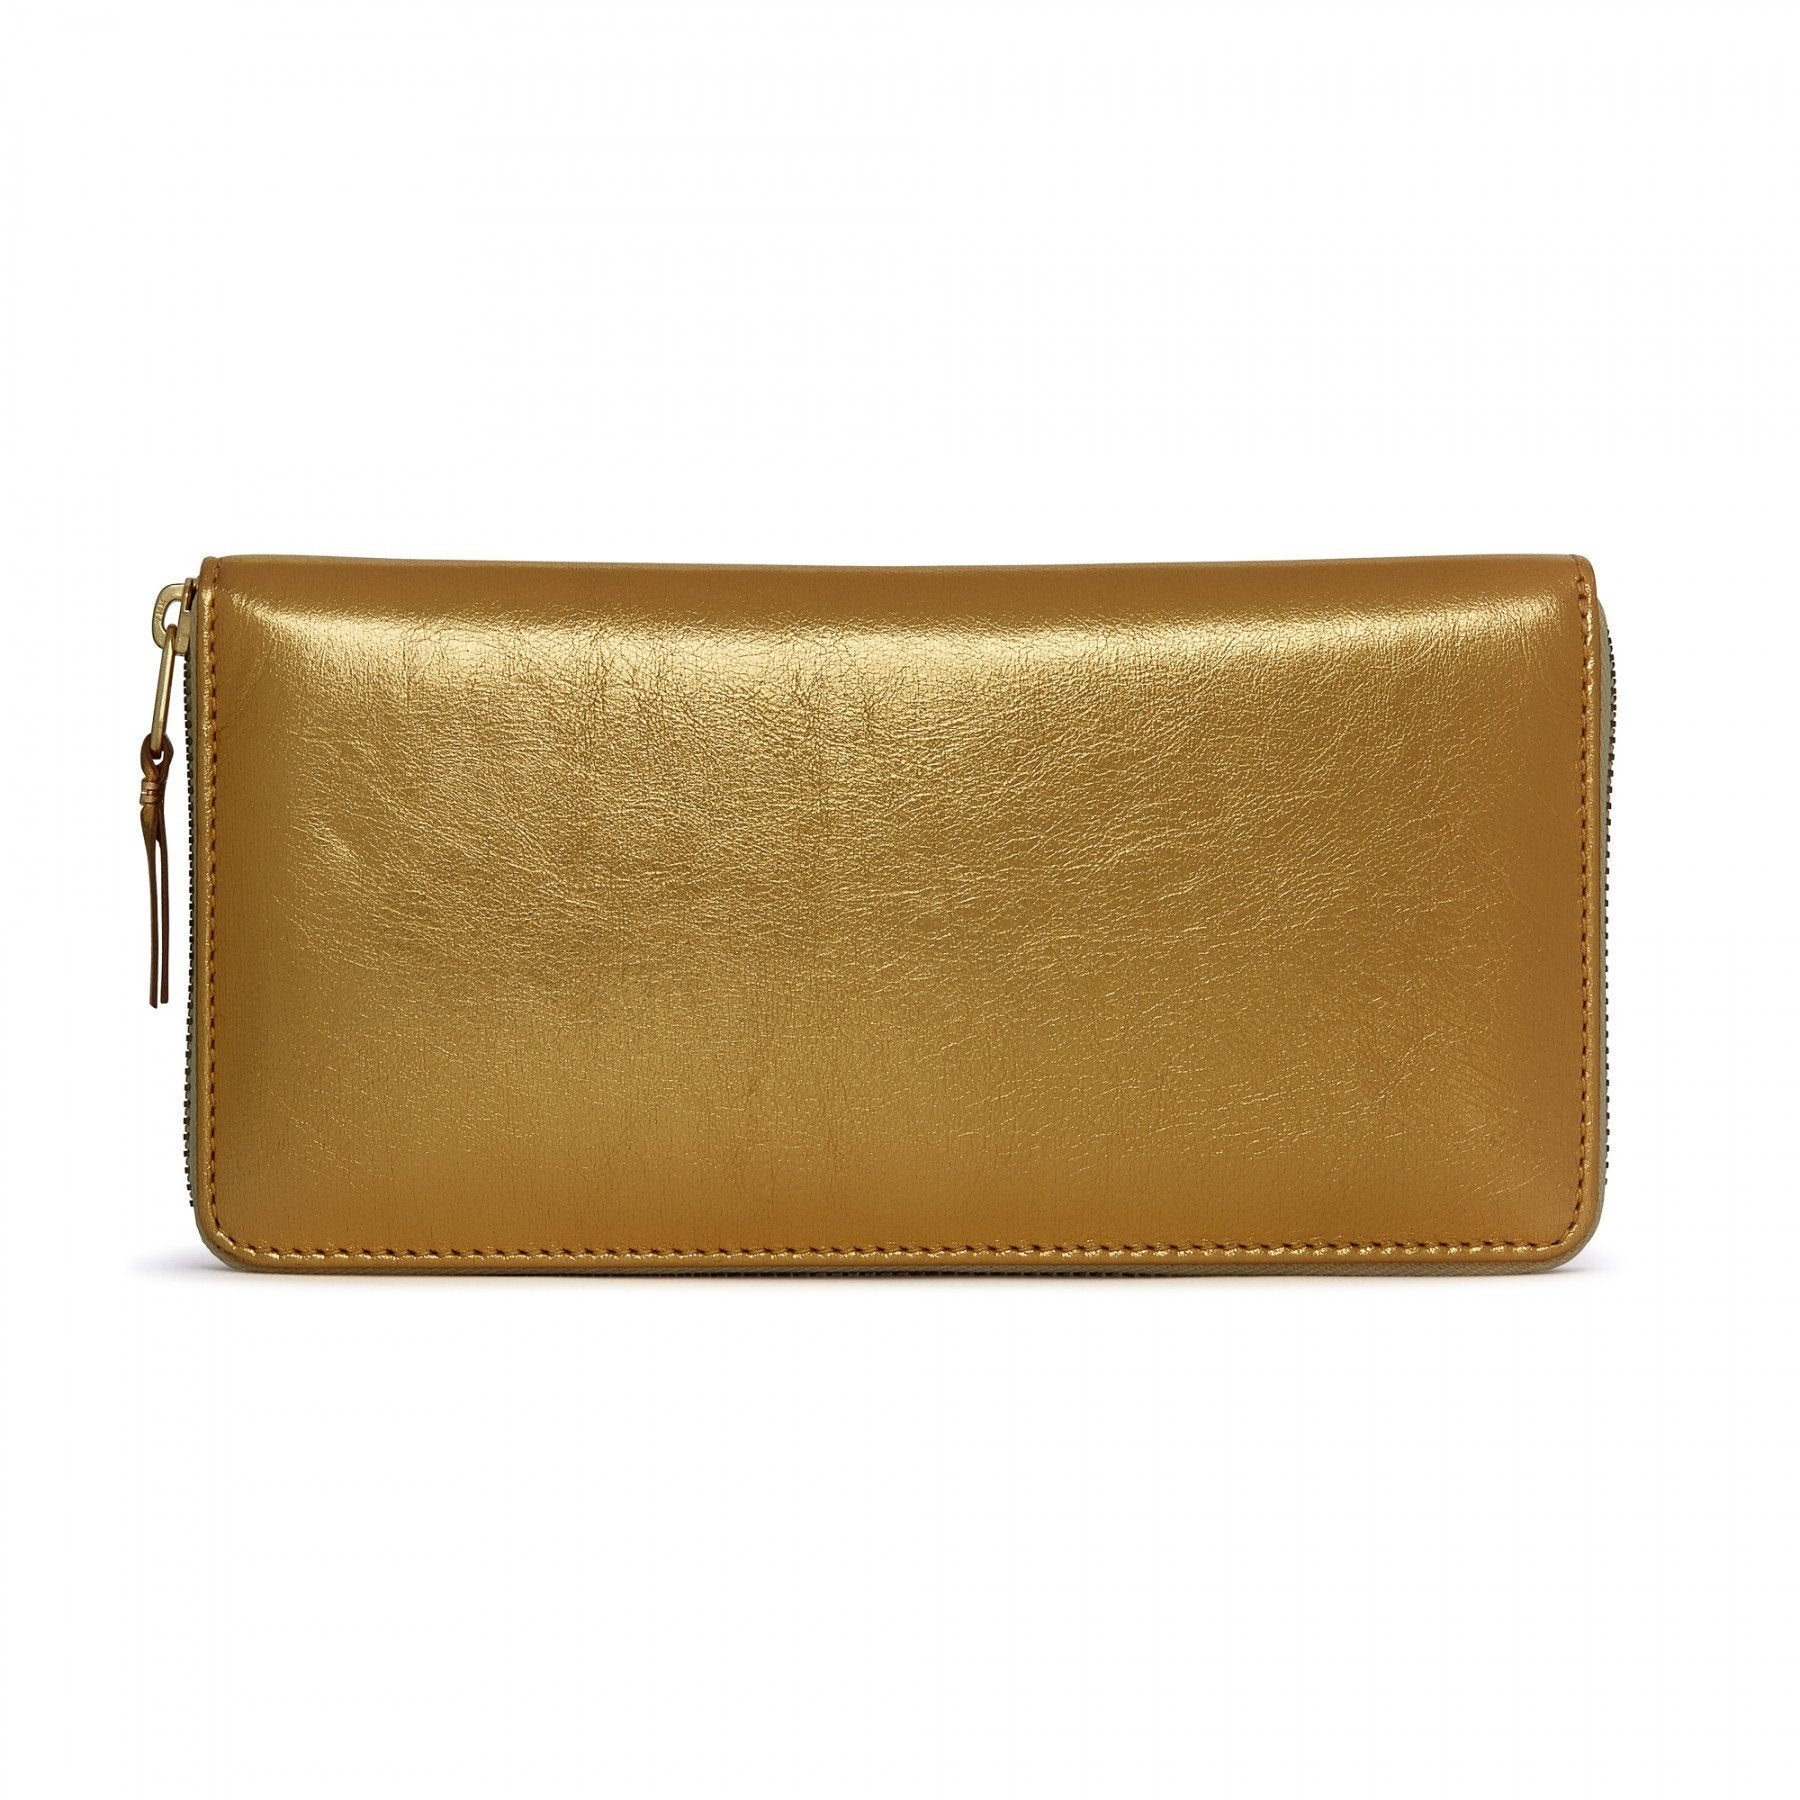 Gold and Silver Group Wallet 0110GSG